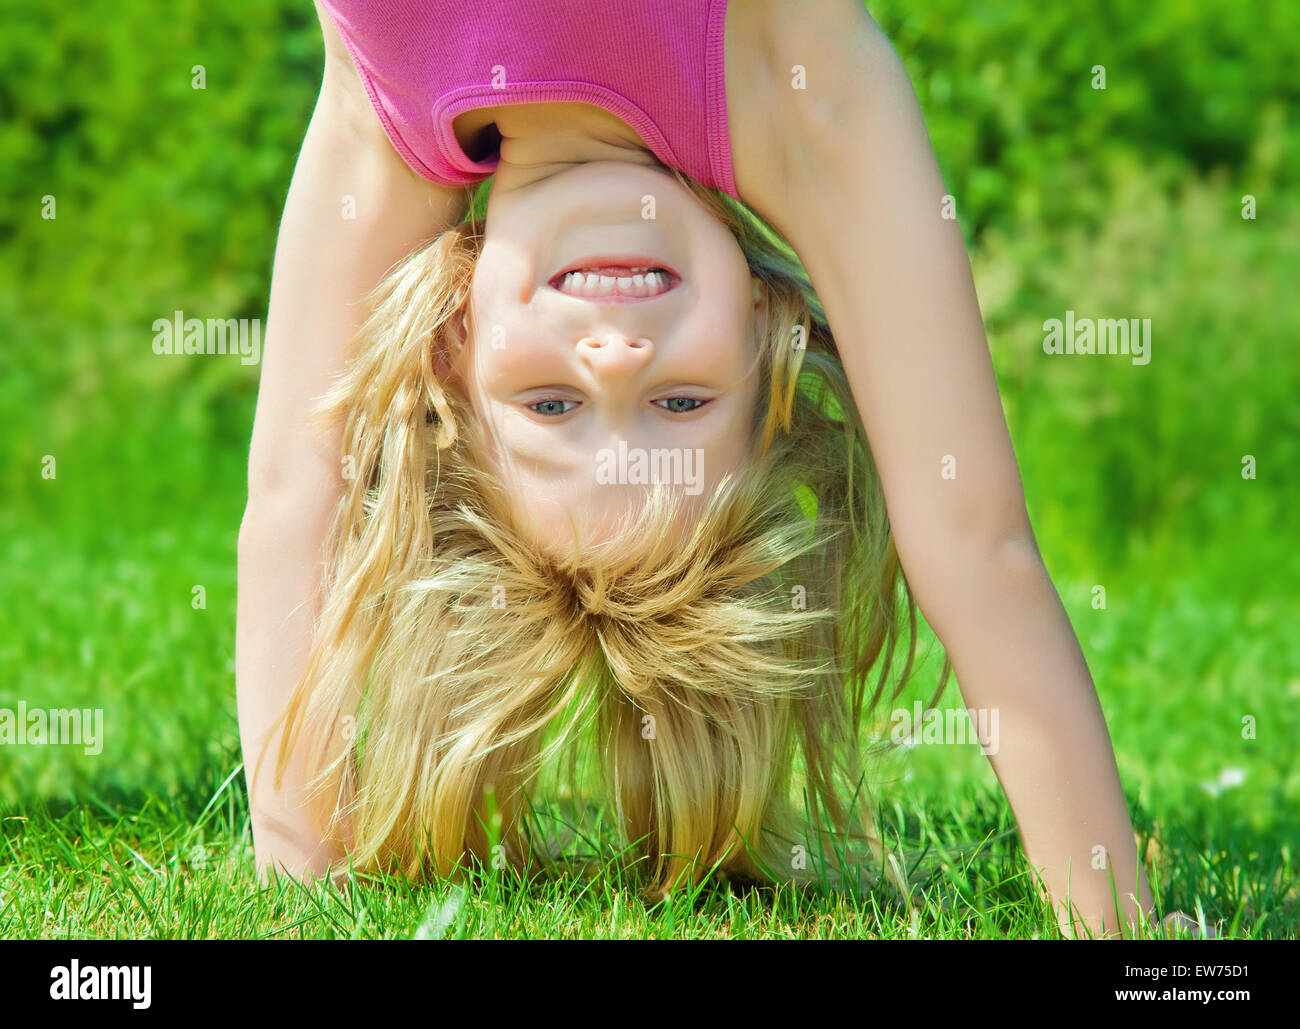 young girl doing a handstand Stock Photo